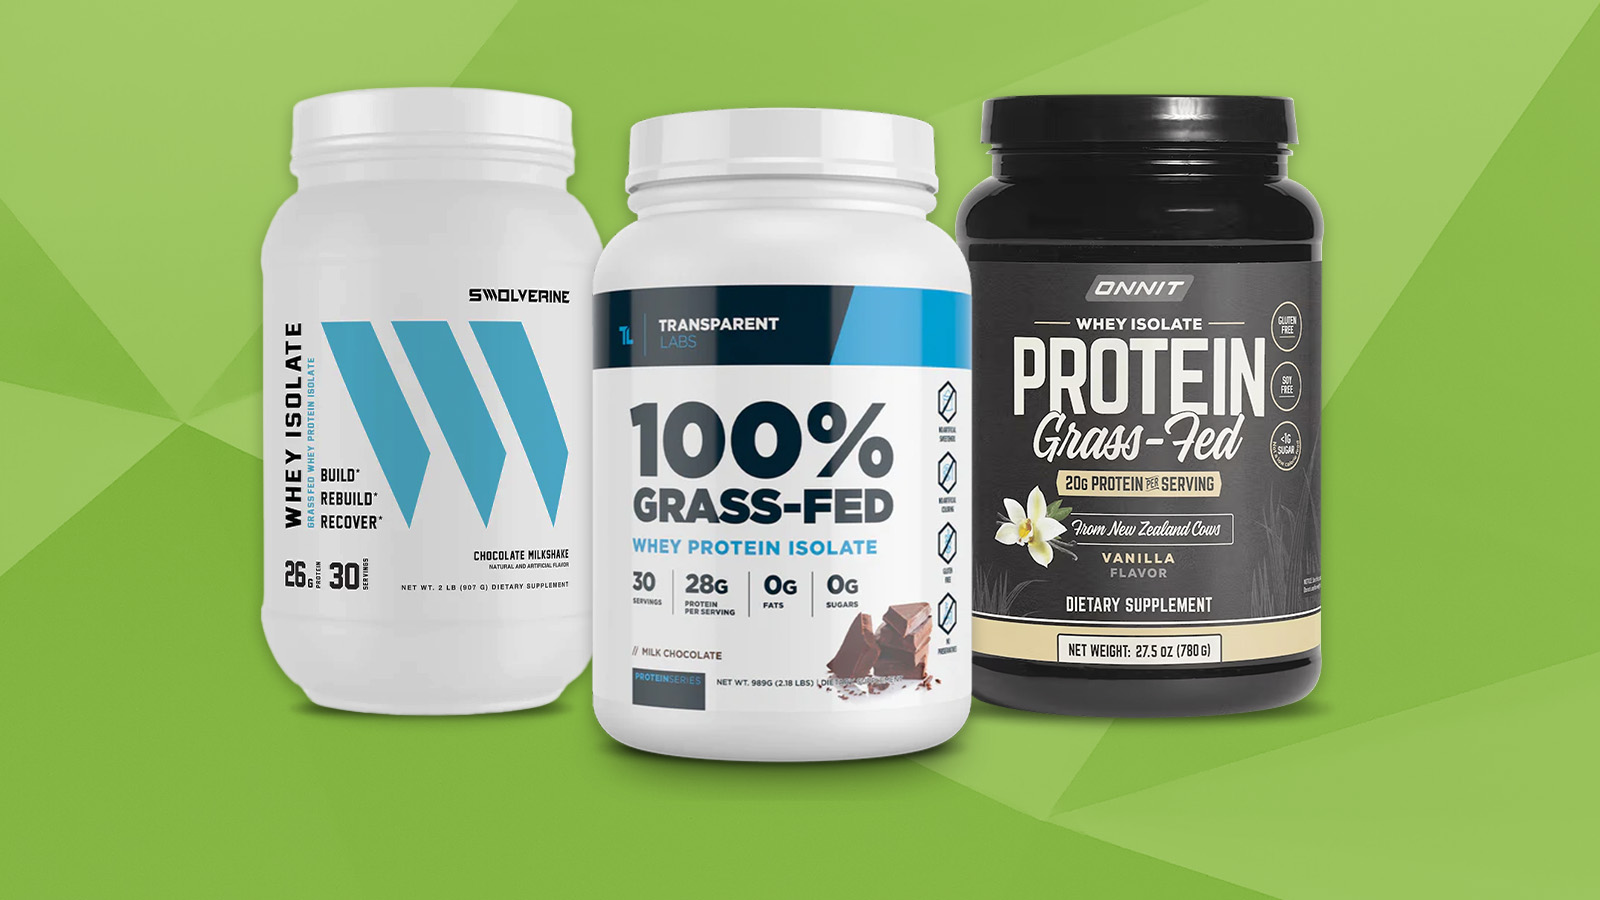 https://barbend.com/wp-content/uploads/2022/12/The-Best-Whey-Isolate-Protein-Powders-For-Building-Muscle-Digestion-And-More.jpg